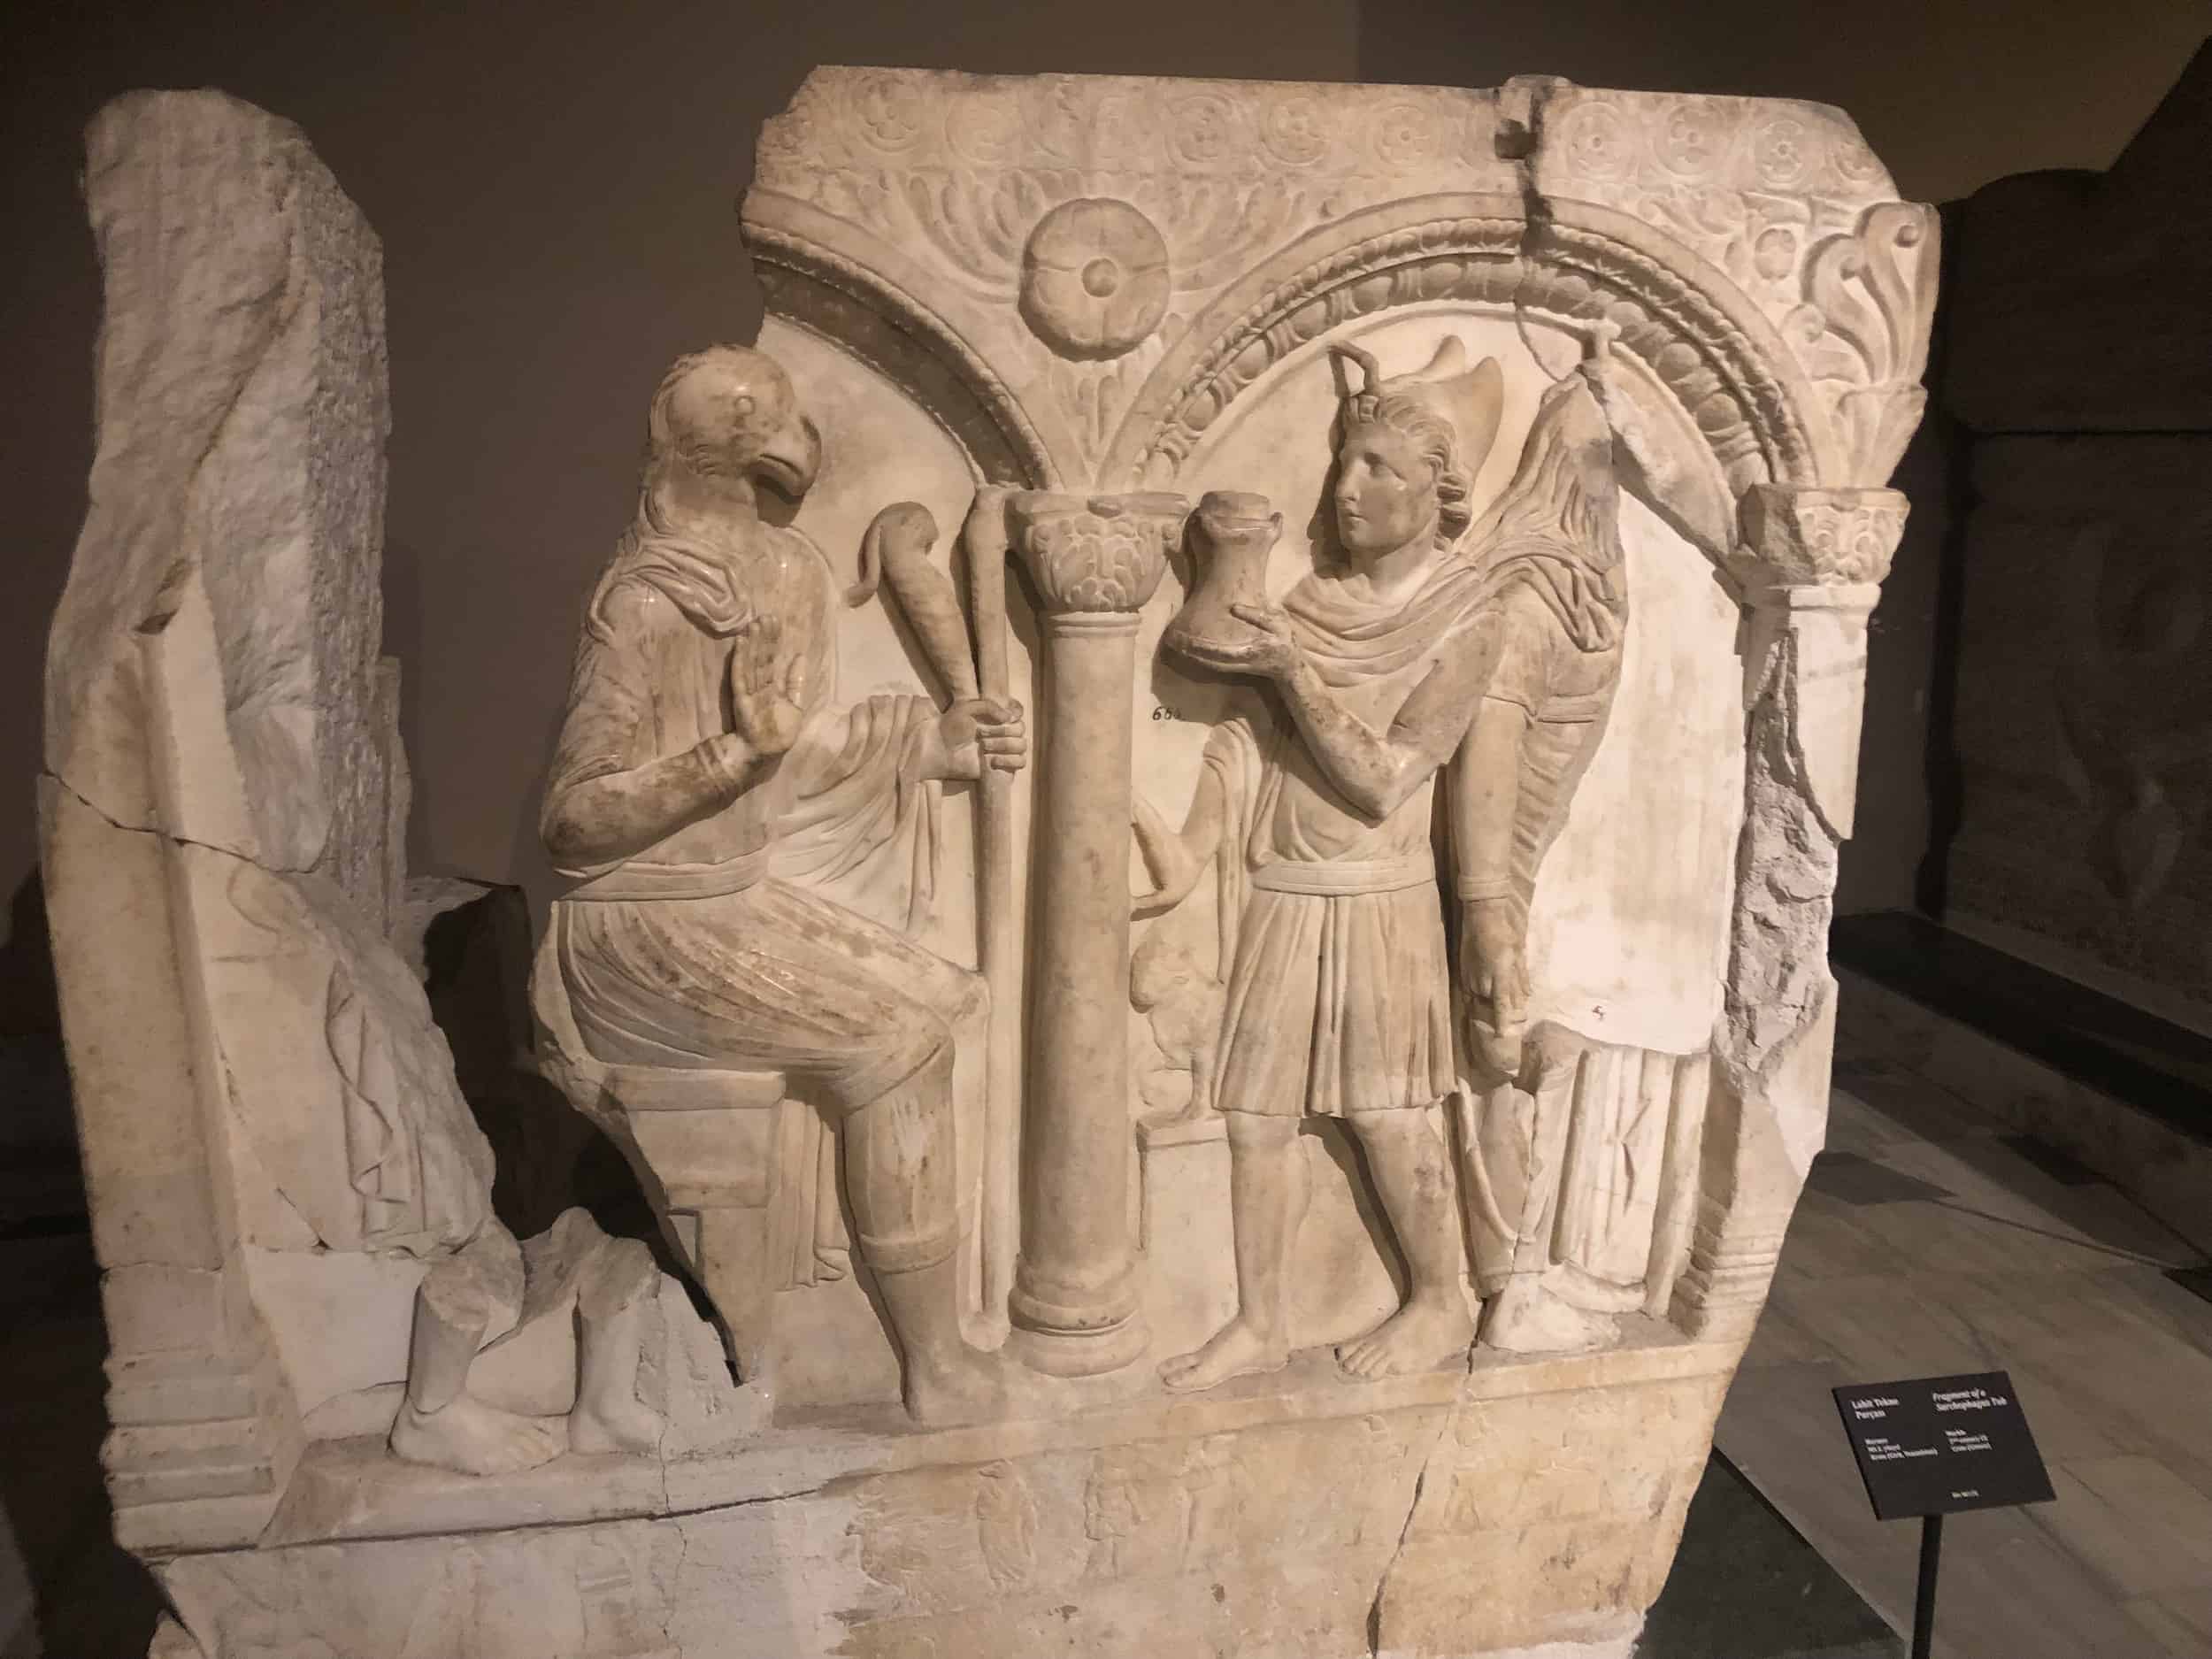 Fragments of a sarcophagus; marble; 2nd century; Crete, Greece